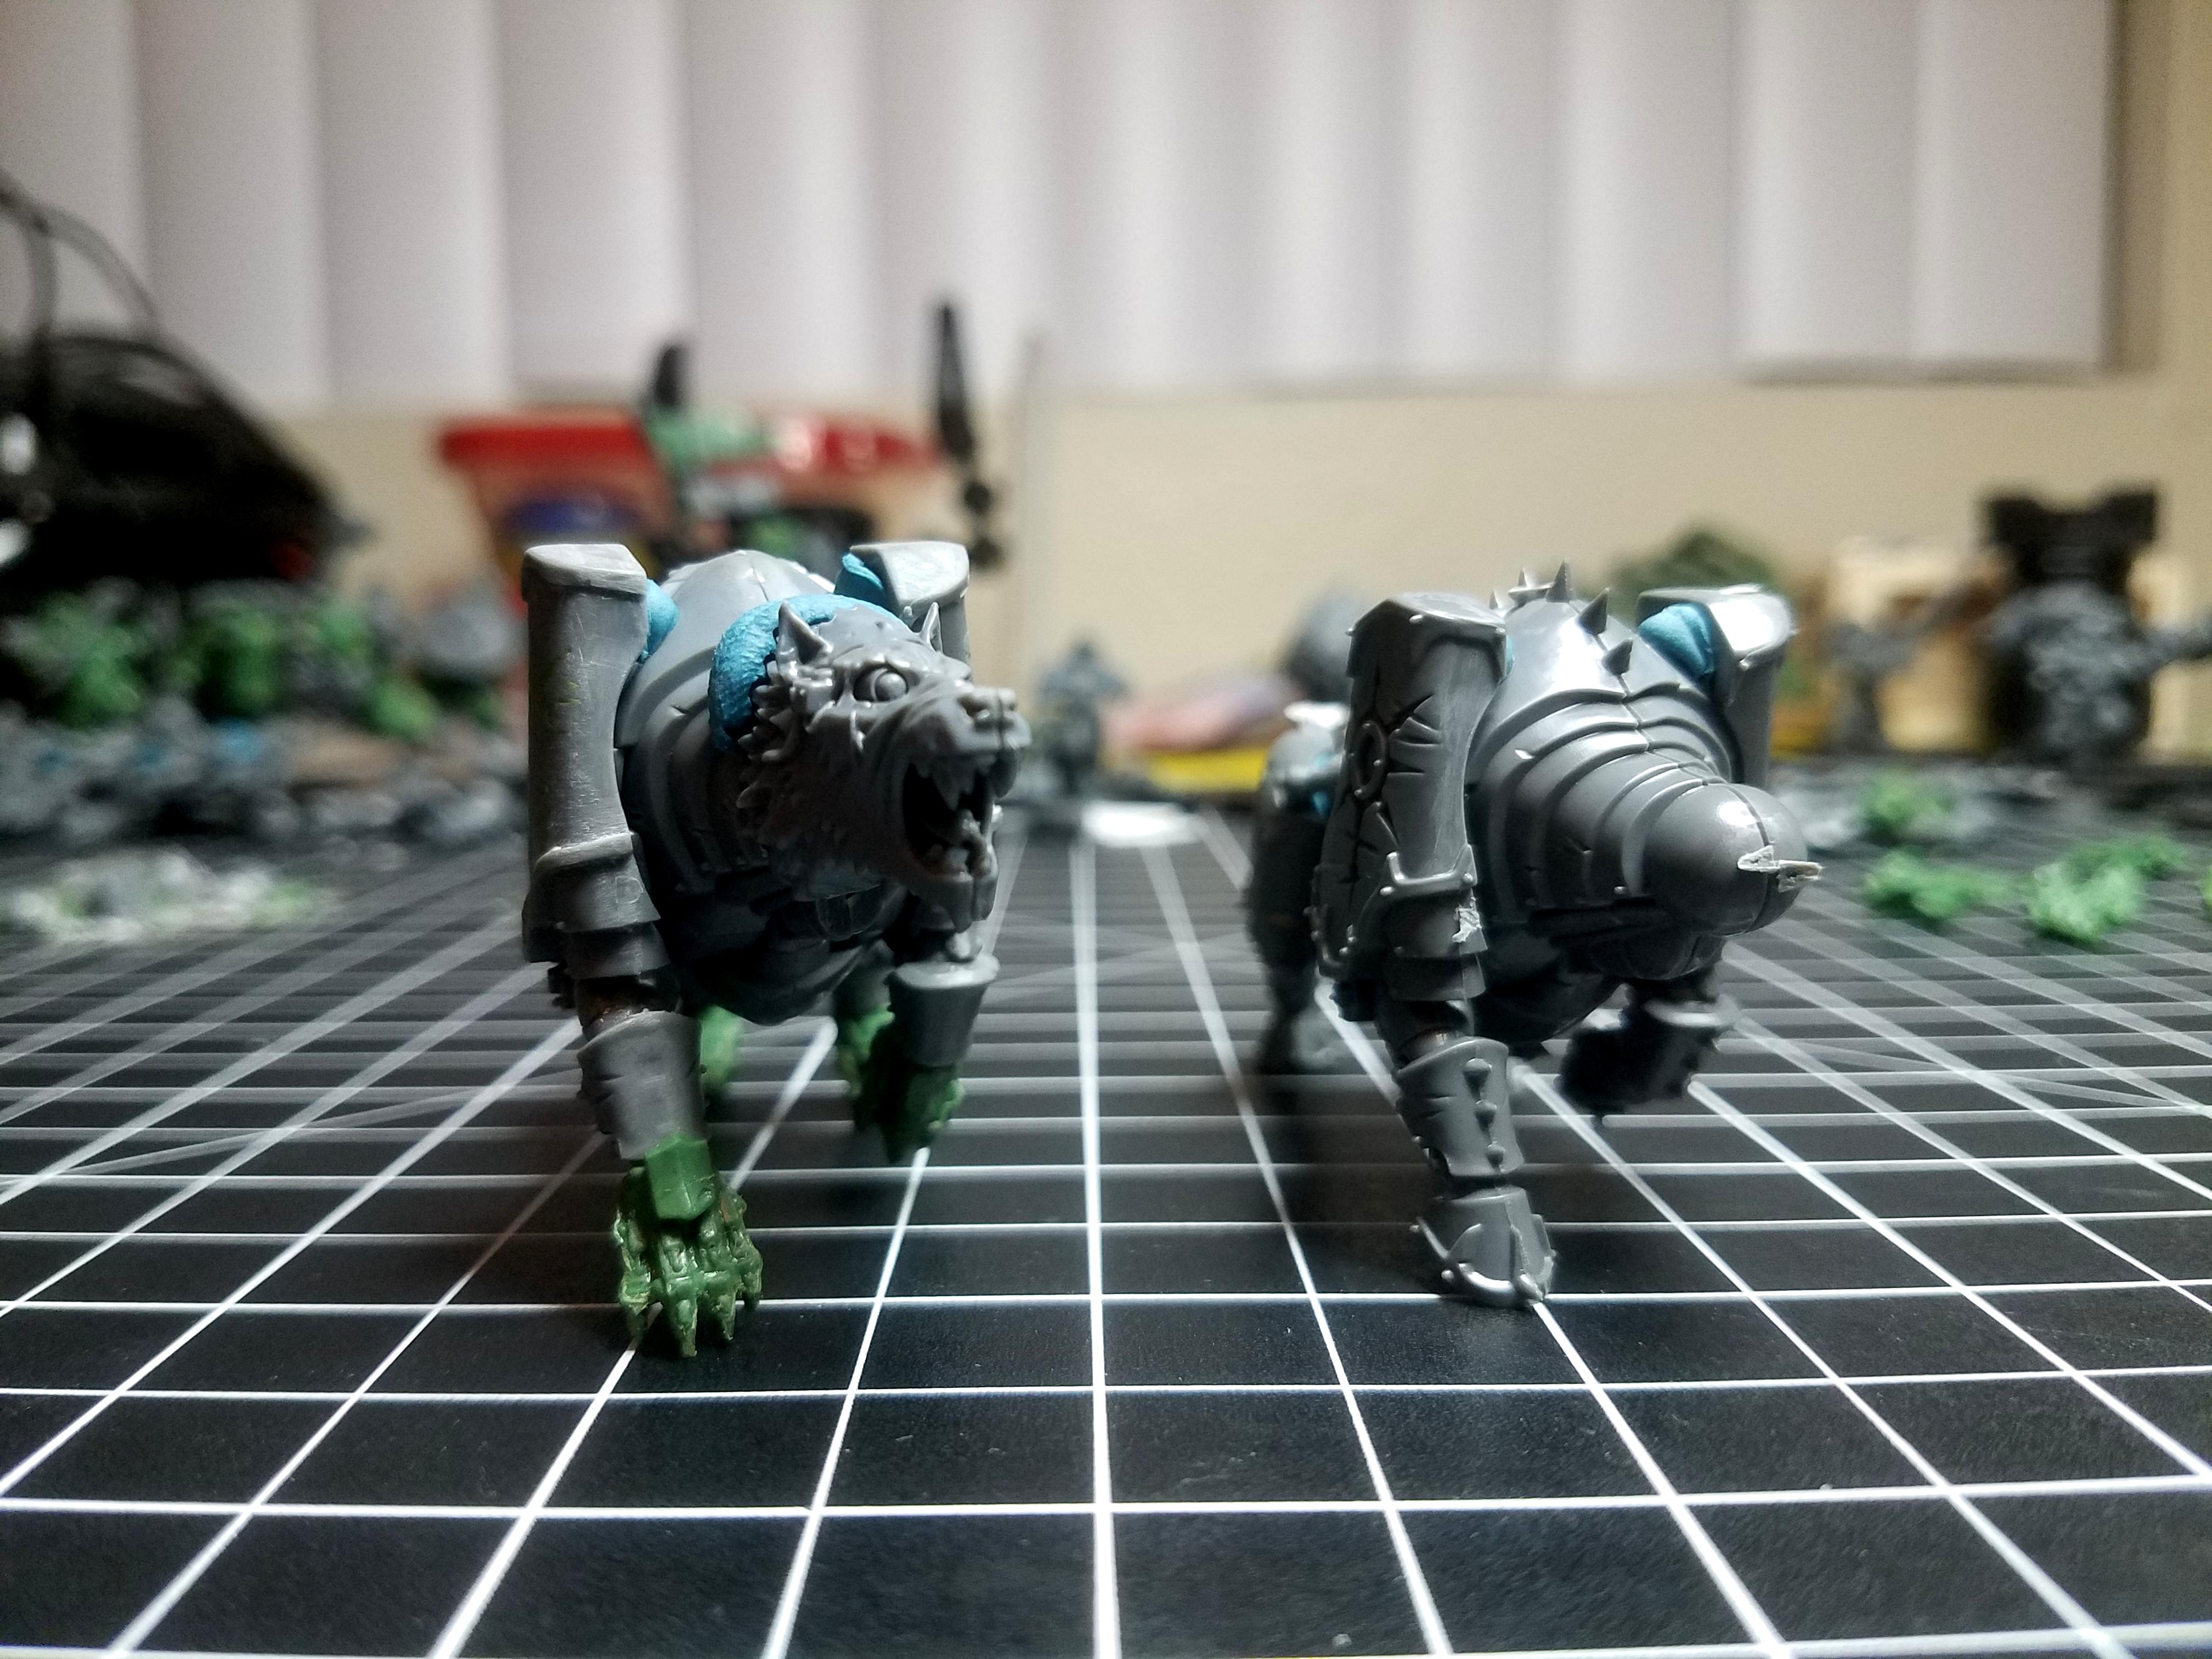 Space Marines, Space Wolves, Thunderwolves, Twc, Wolf Lord, Work In Progress